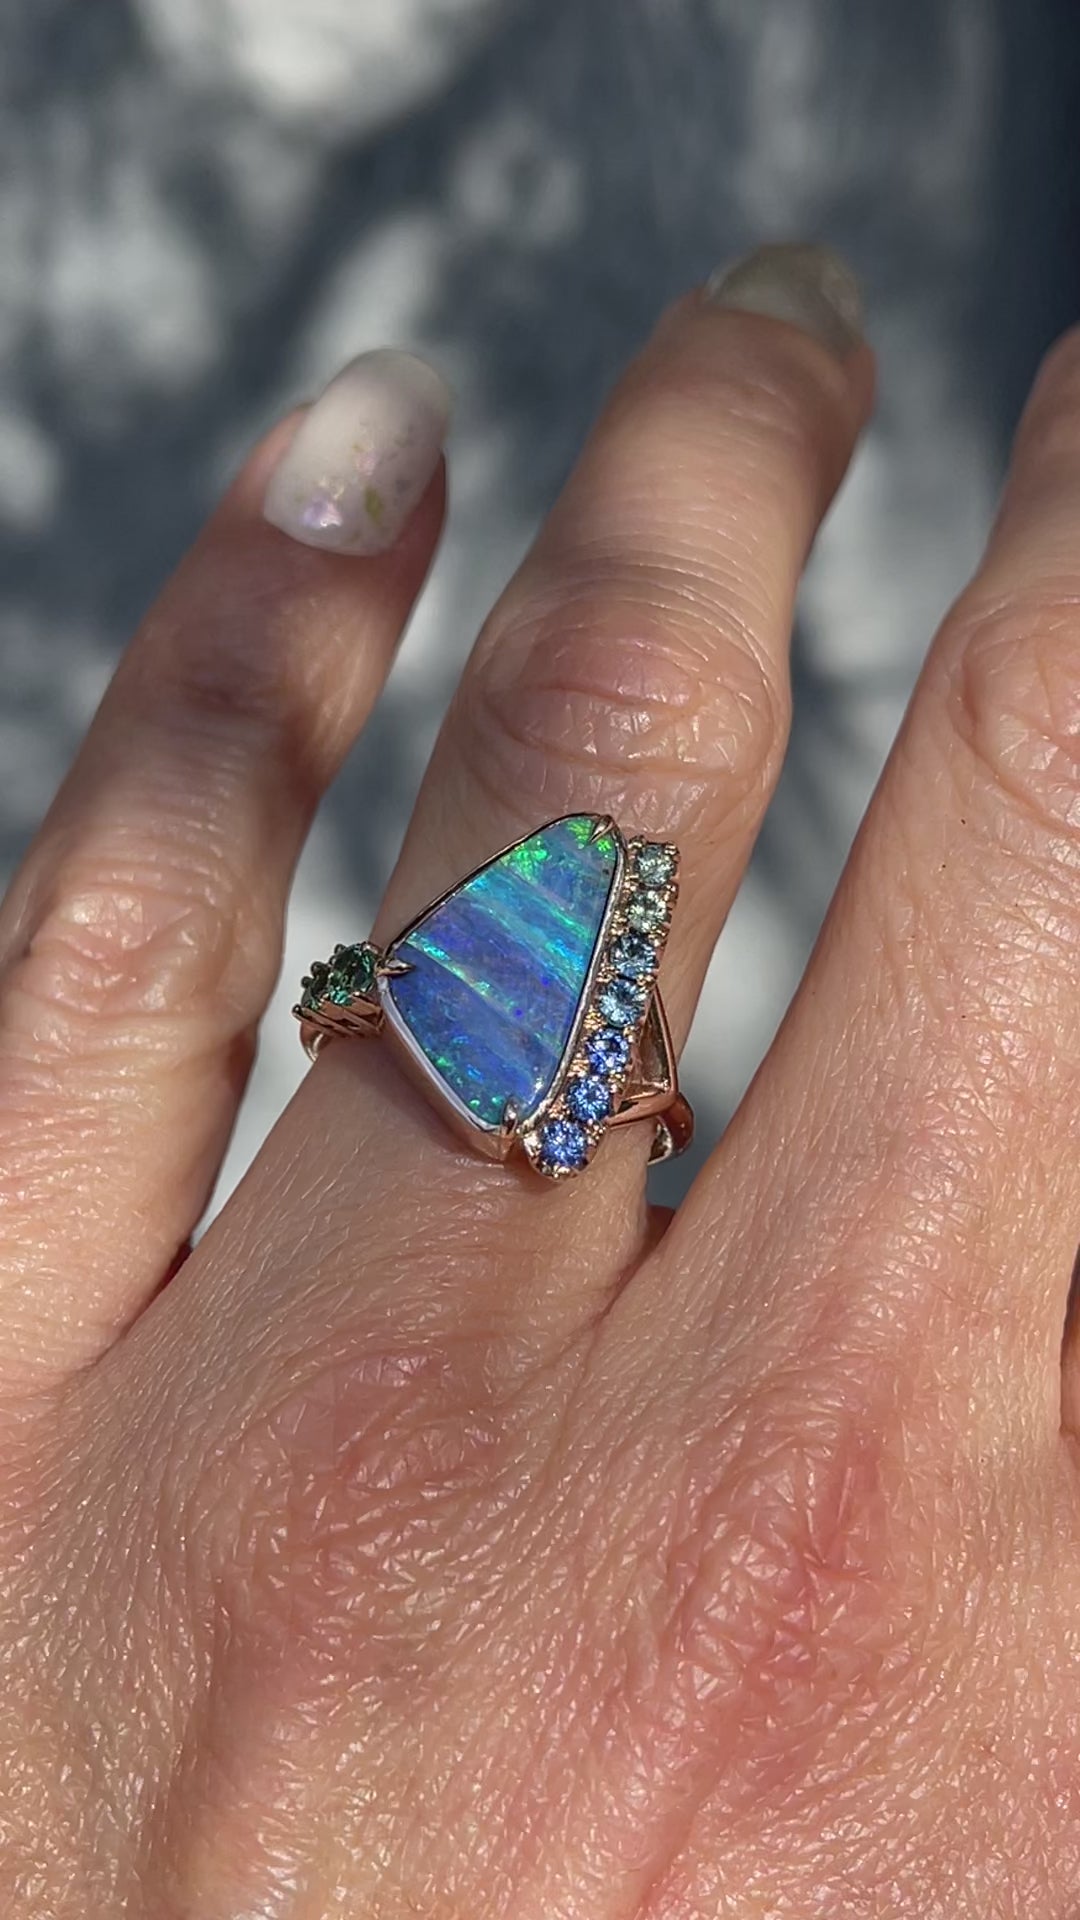 Video of an Australian Opal Ring by NIXIN Jewelry on a hand. The blue opal ring has sapphires and emeralds set in rose gold.